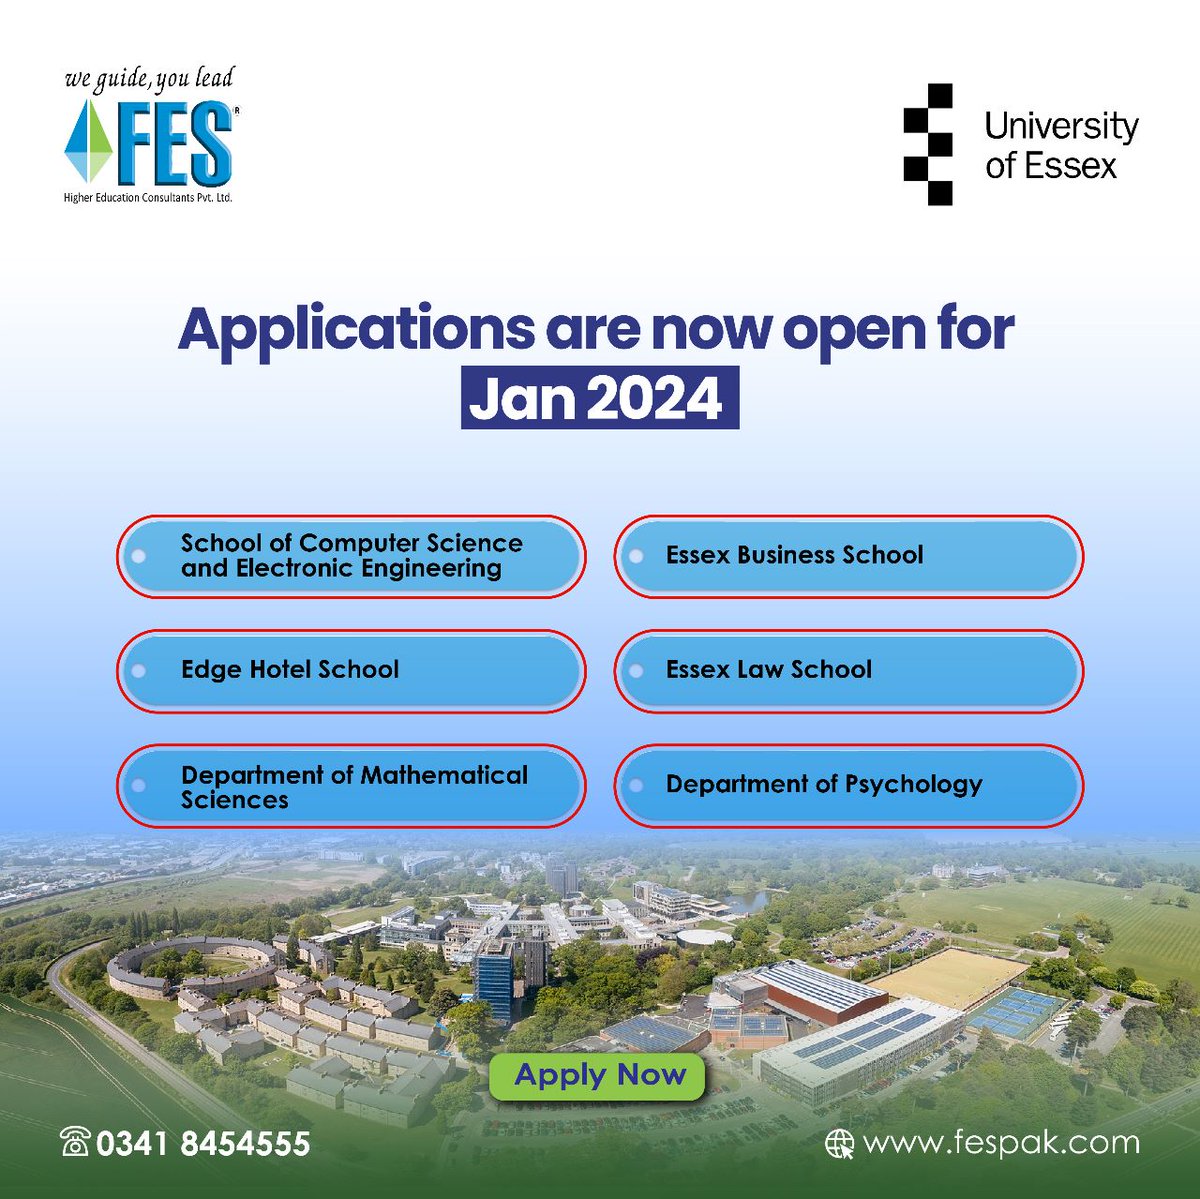 University of Essex, #UK provides a path to unlock your educational opportunities. Applications are now open for the January 2024 intake.

📞03418454555

#fes #fesconsultants #studyabroad #StudyinUK #UnitedKingdom #studyvisa #education #bachelors #masters #internationaleducation